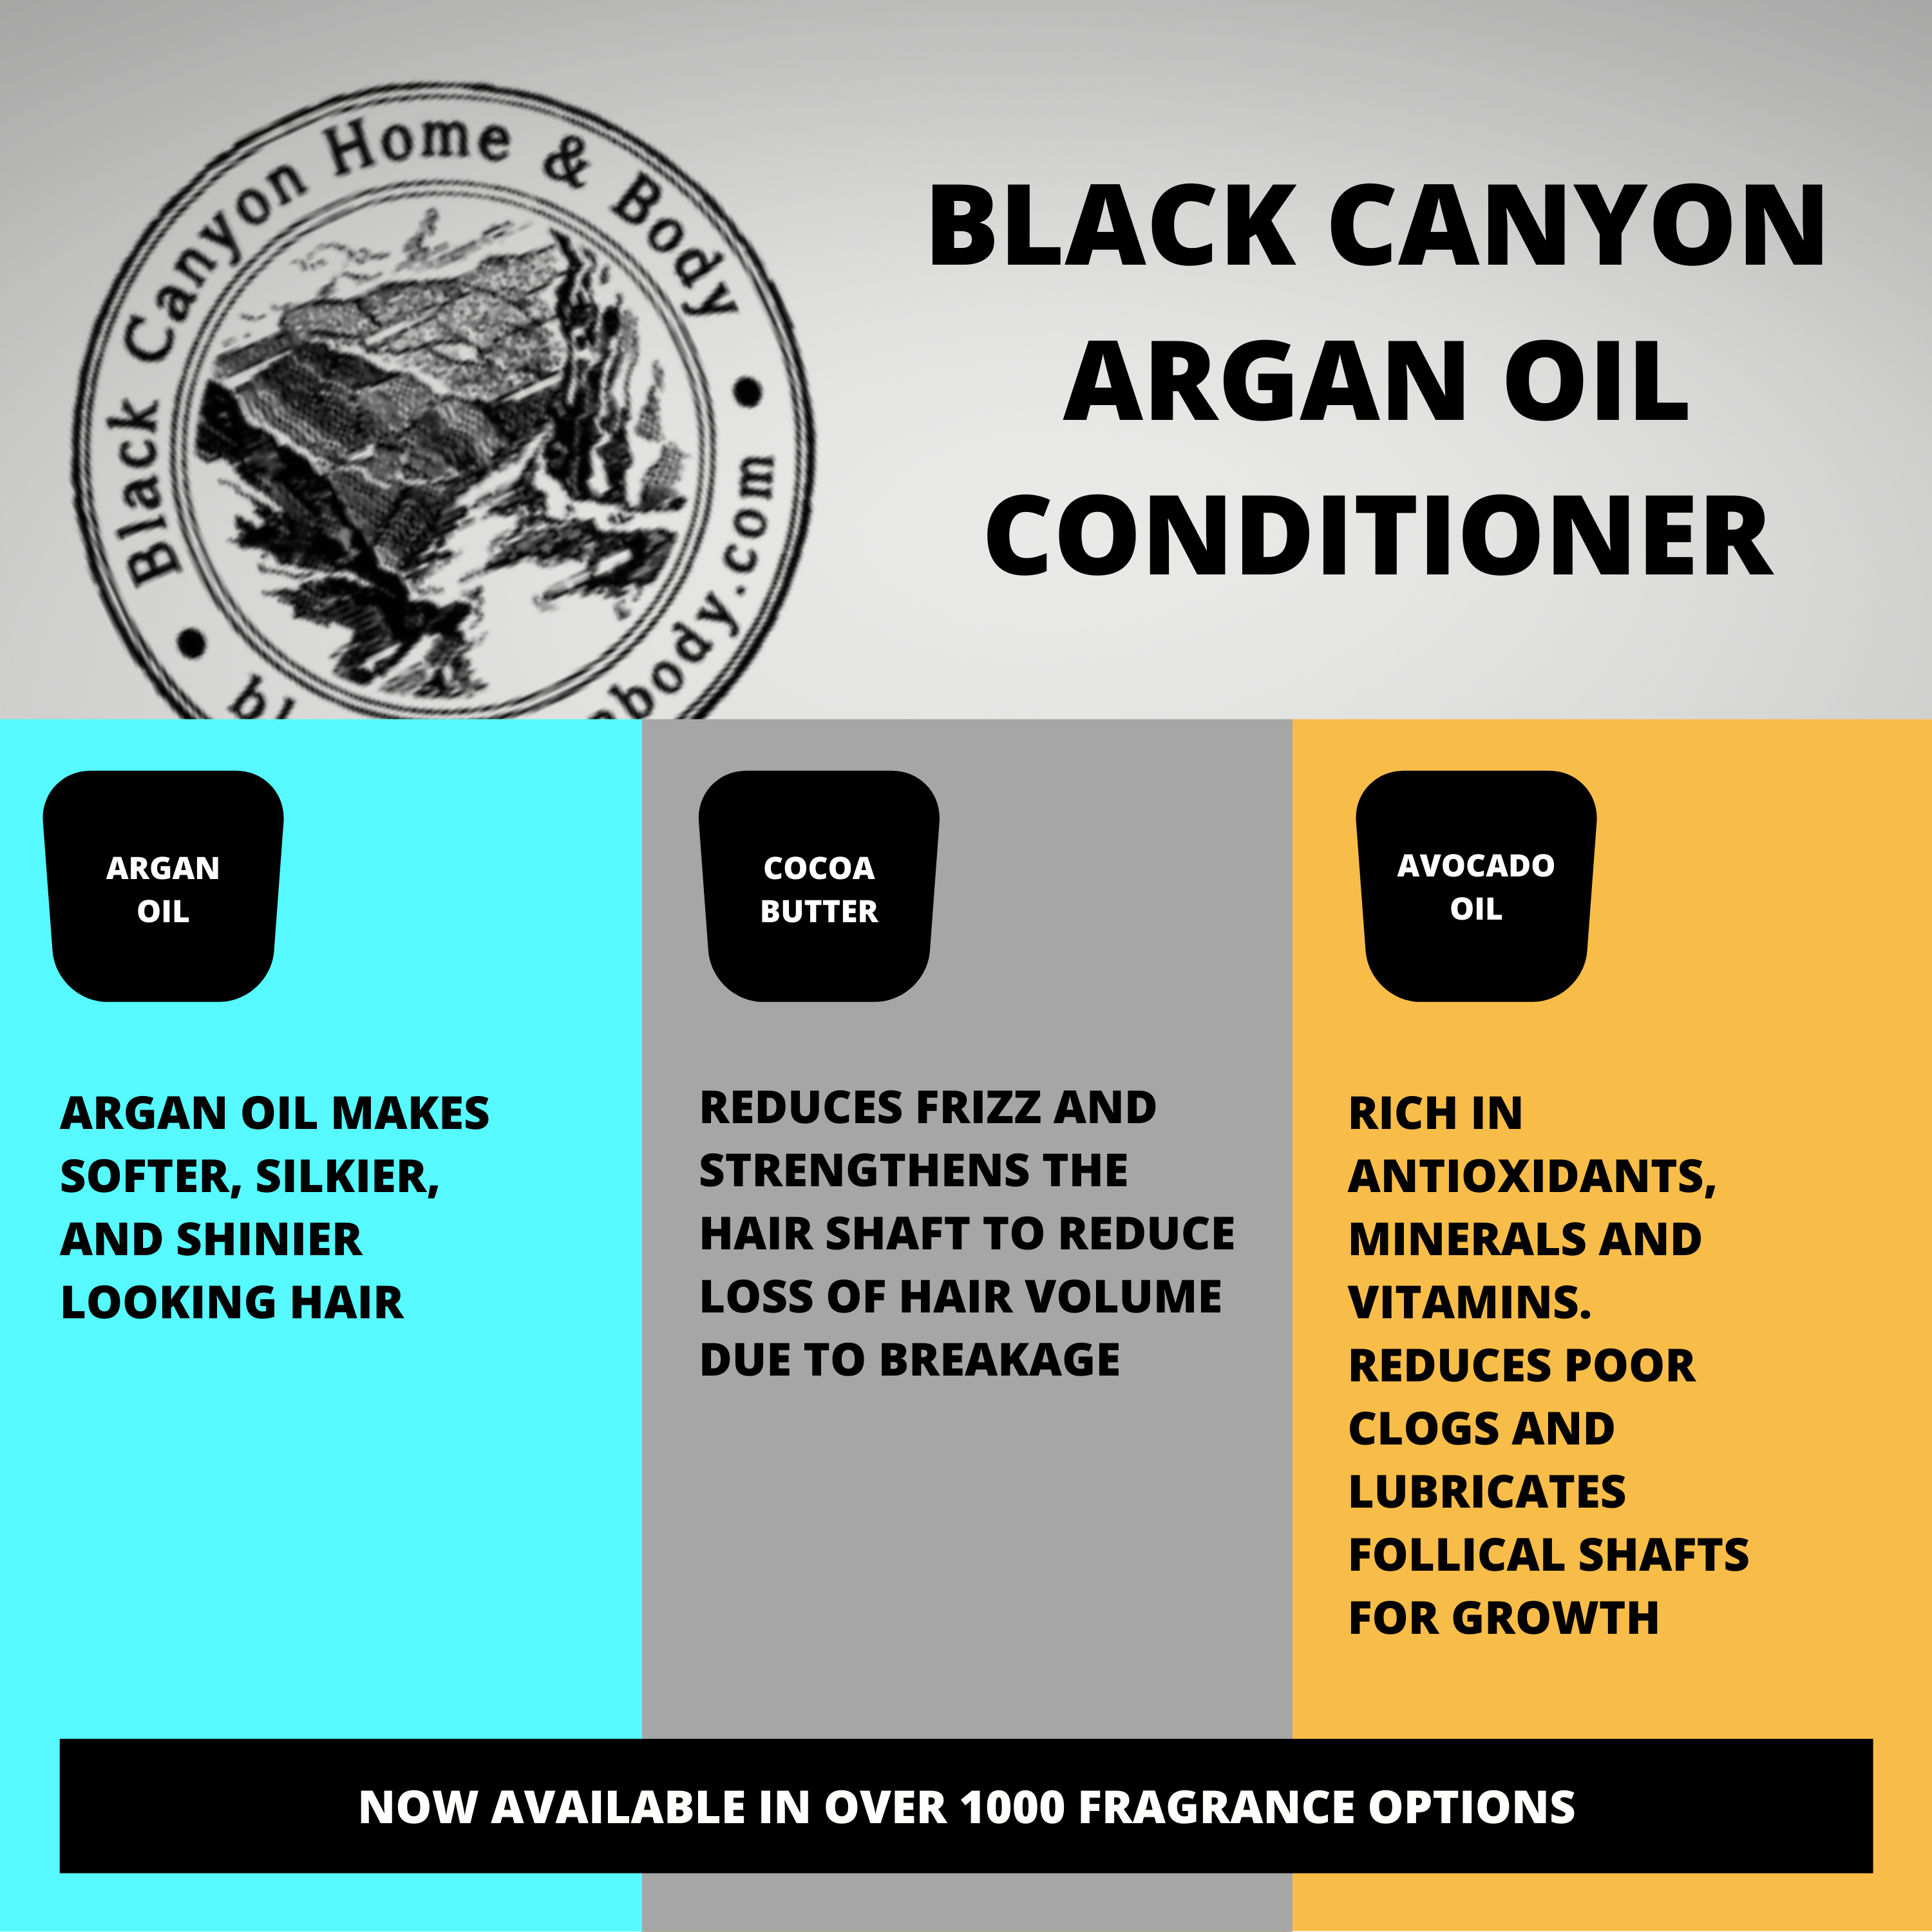 Black Canyon Green Apple & Pear Scented Conditioner with Argan Oil